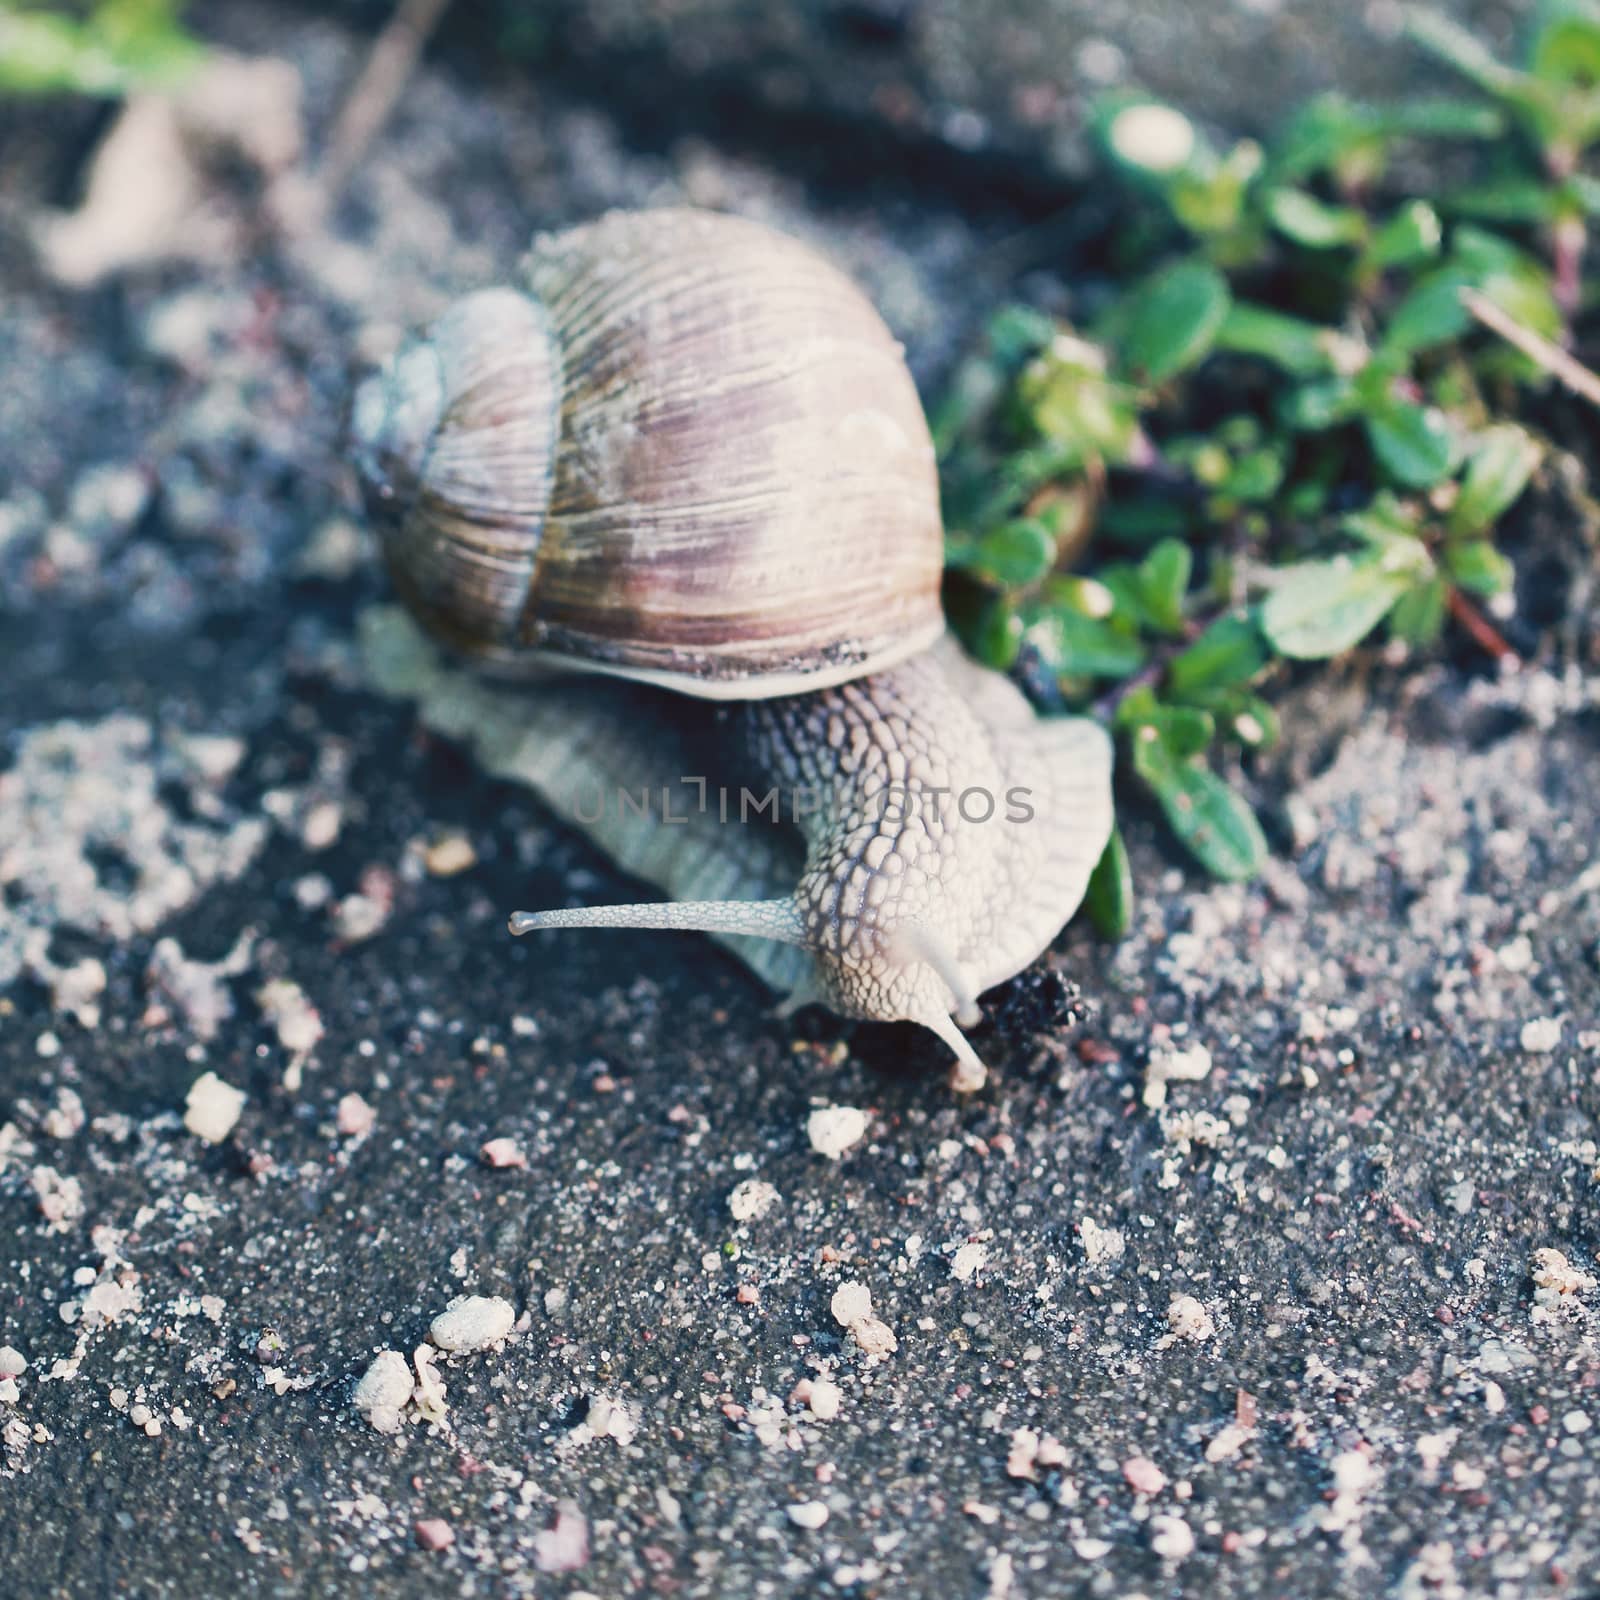 Snail on the road close up photo by Voinakh